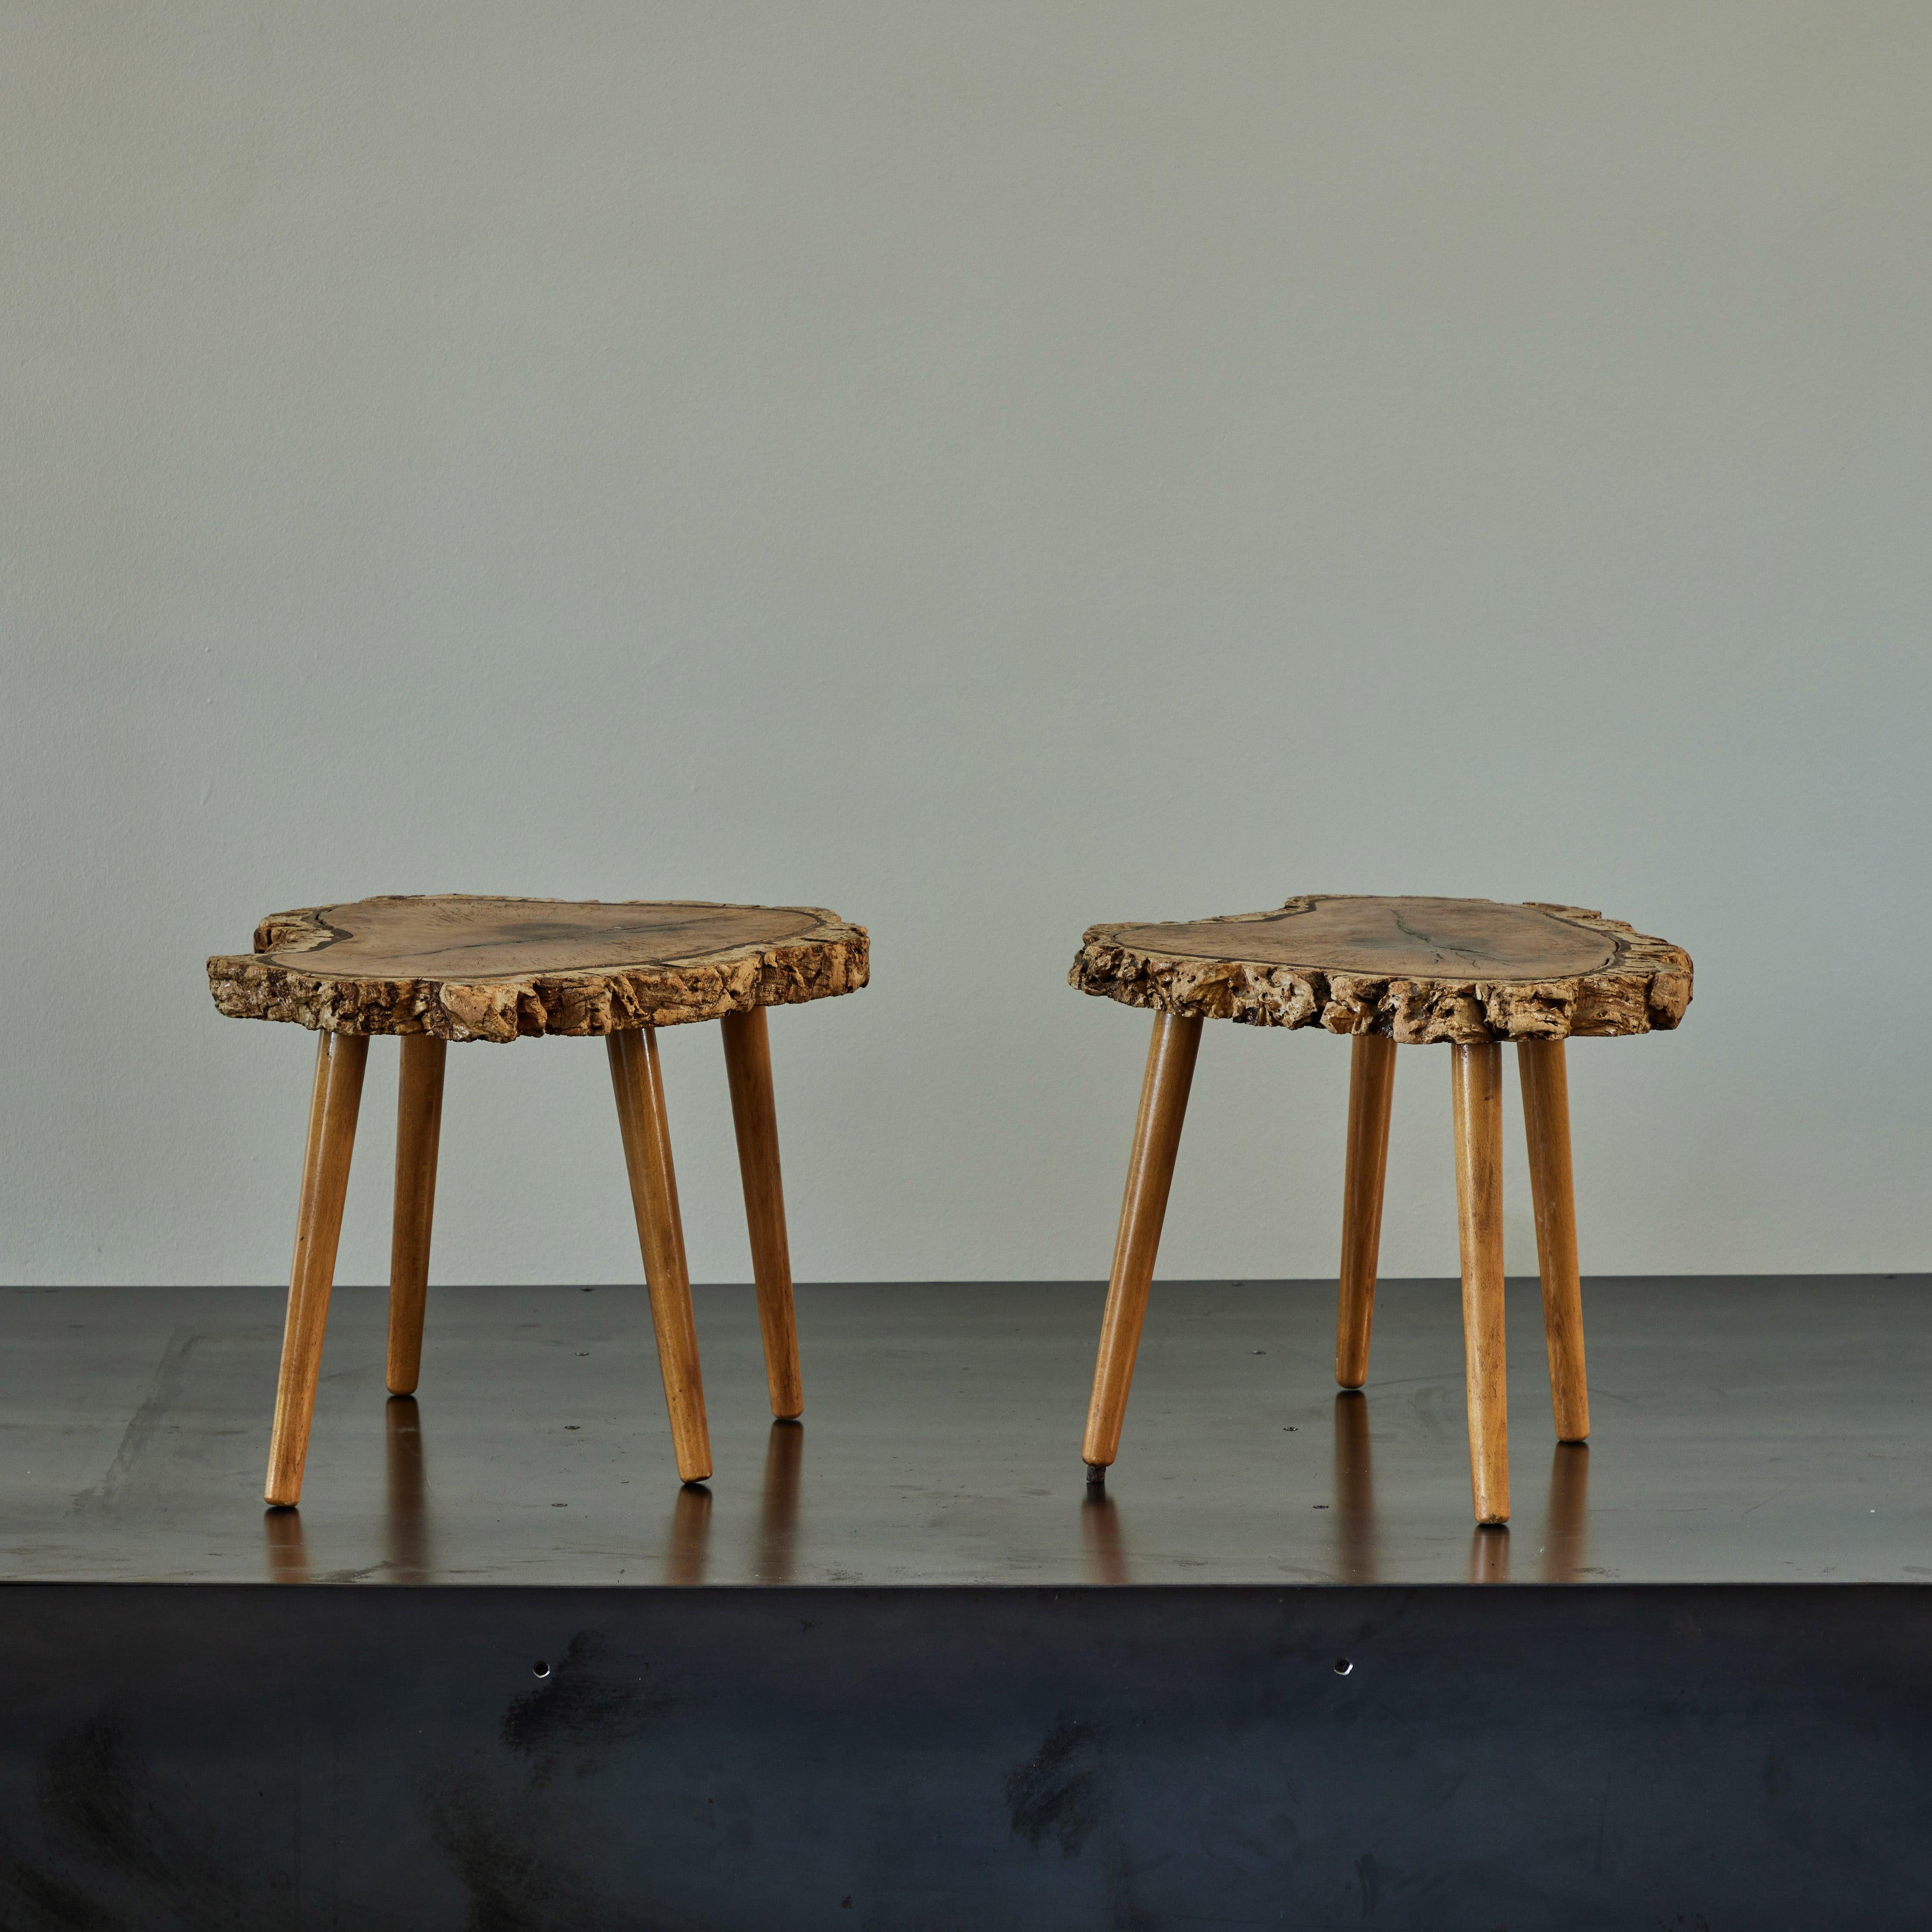 Pair of naturalistic French midcentury live edge wood tables. With blonde, slightly tapered legs, these tables celebrate the natural beauty of wood. Tactile, sculptural, and with a remarkable grain, the pair would bring an organic sexiness to any